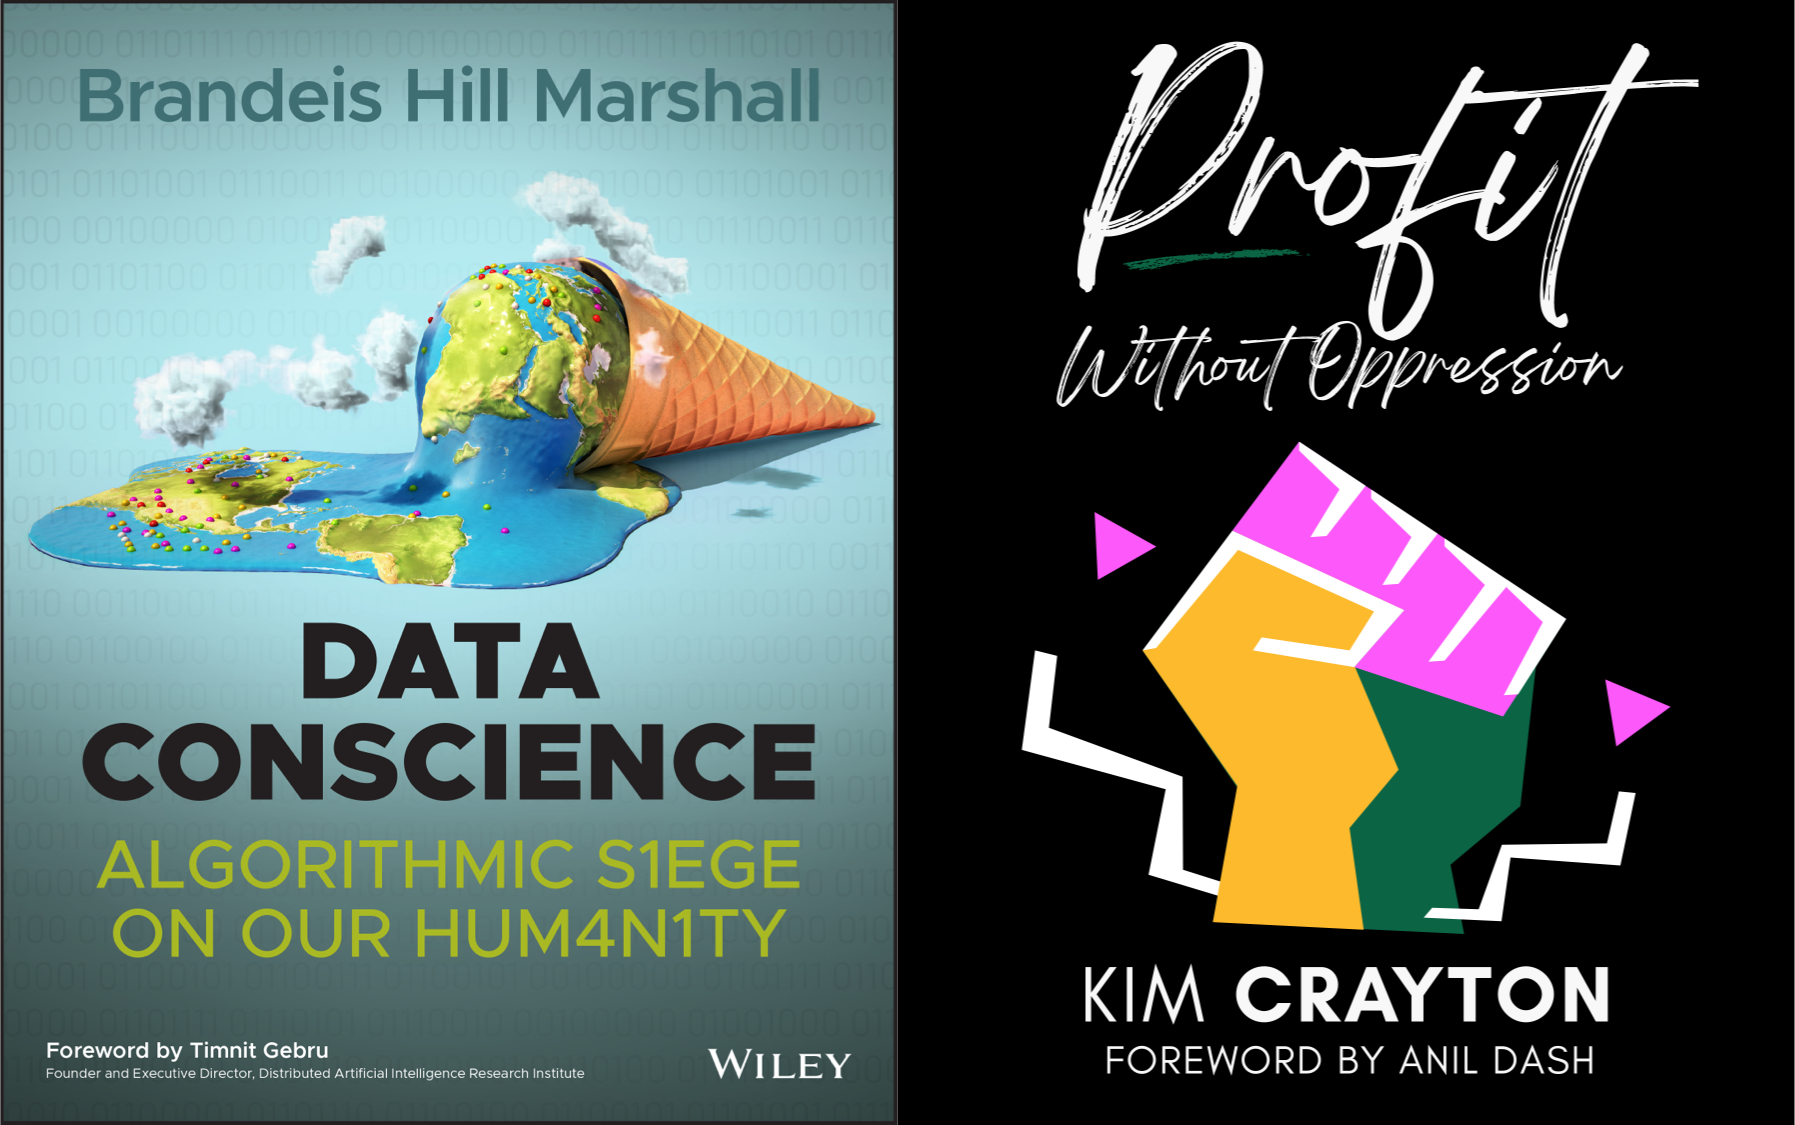 Featuring Brand New Books by REFACTR.TECH Speakers, Dr. Brandeis Marshall and Kim Crayton